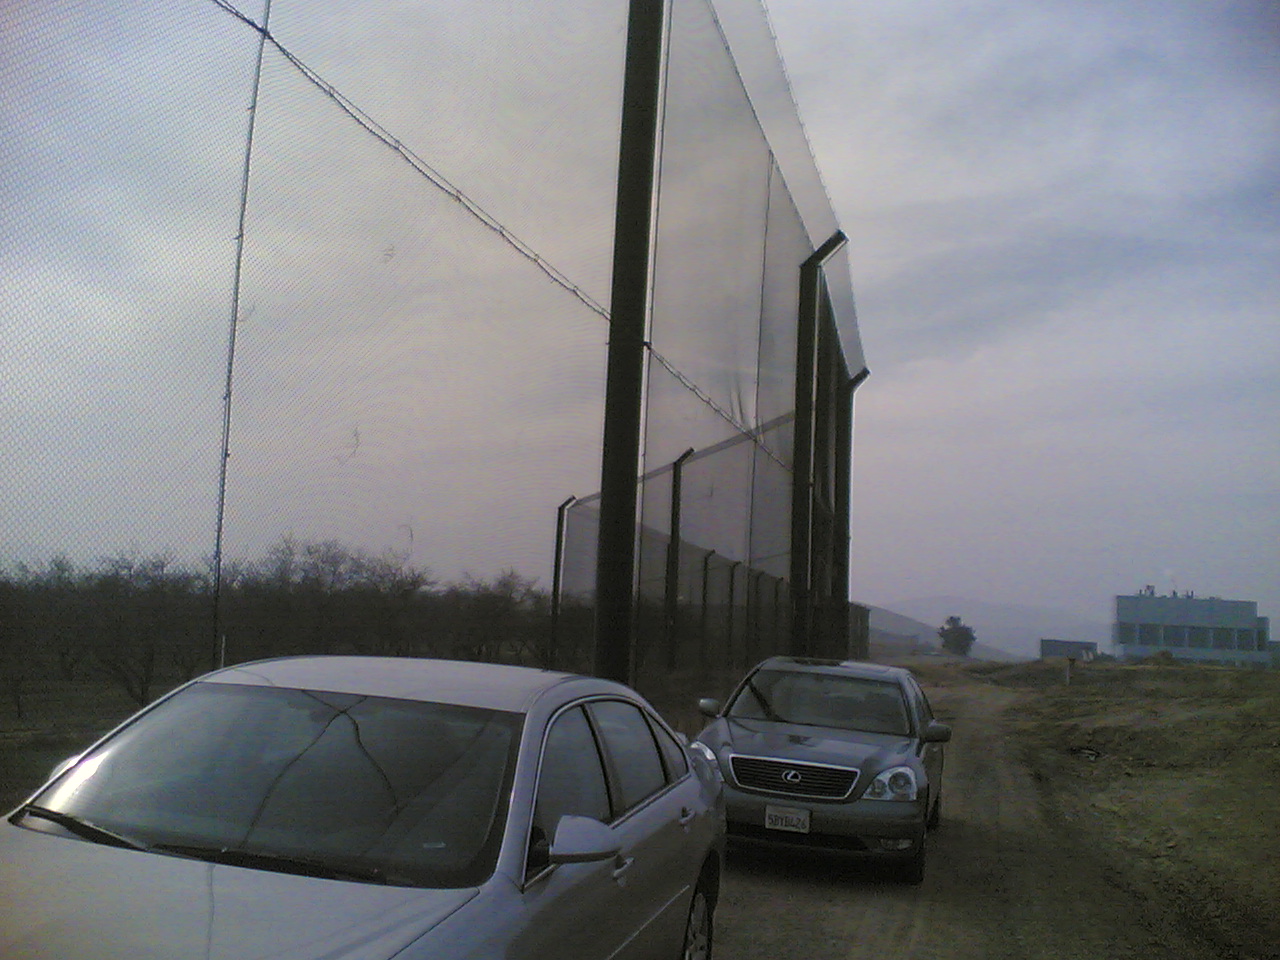 Judge Netting - Fink Road Crows Landing, CA - Project